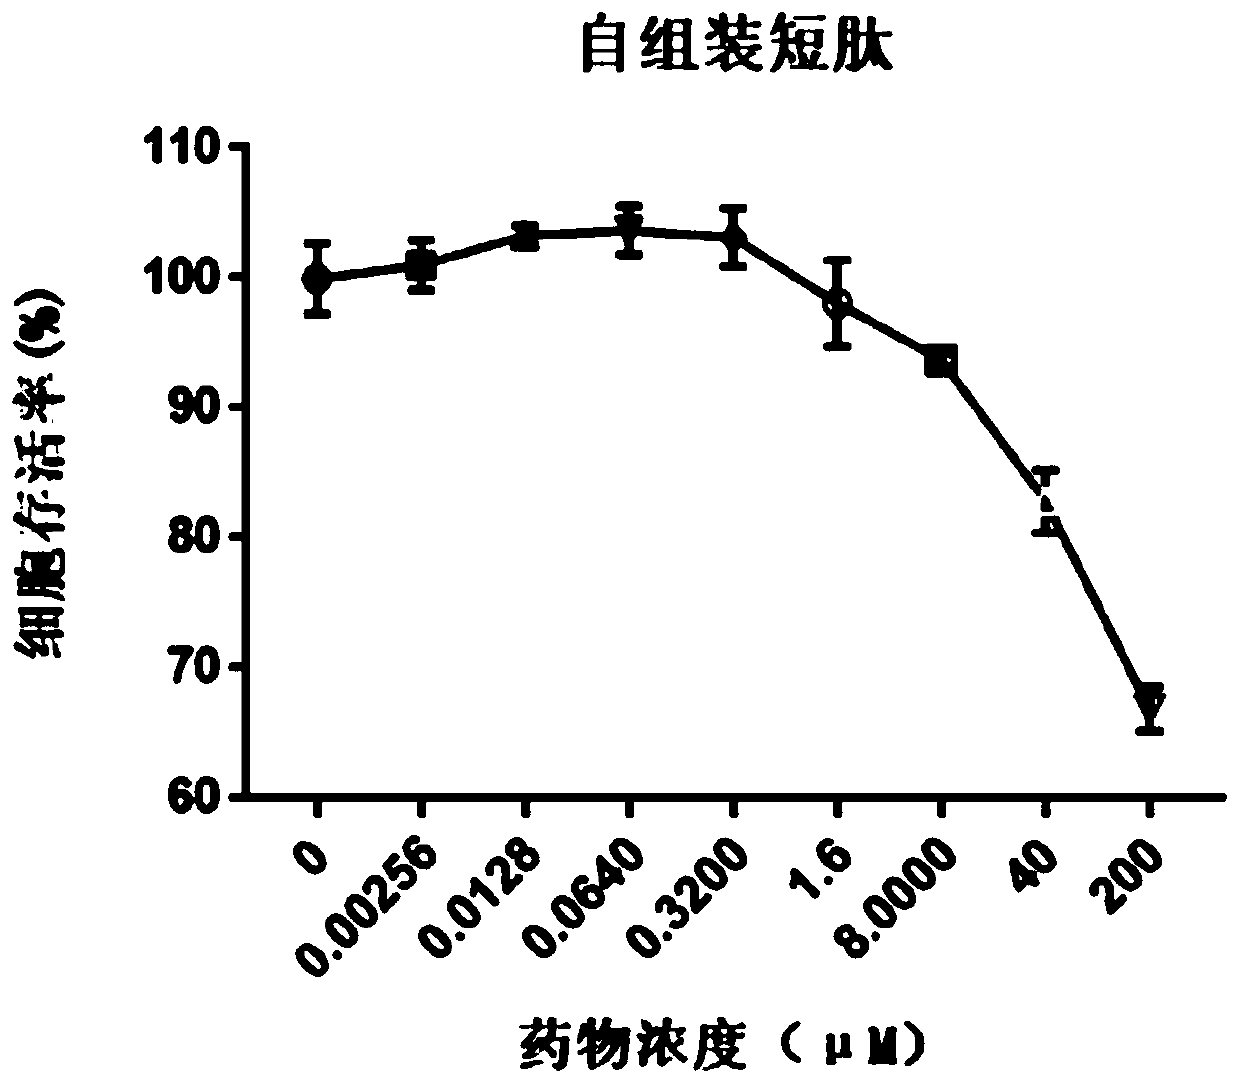 Self-assembly short-chain peptide and application of short-chain peptide in treatment of acne